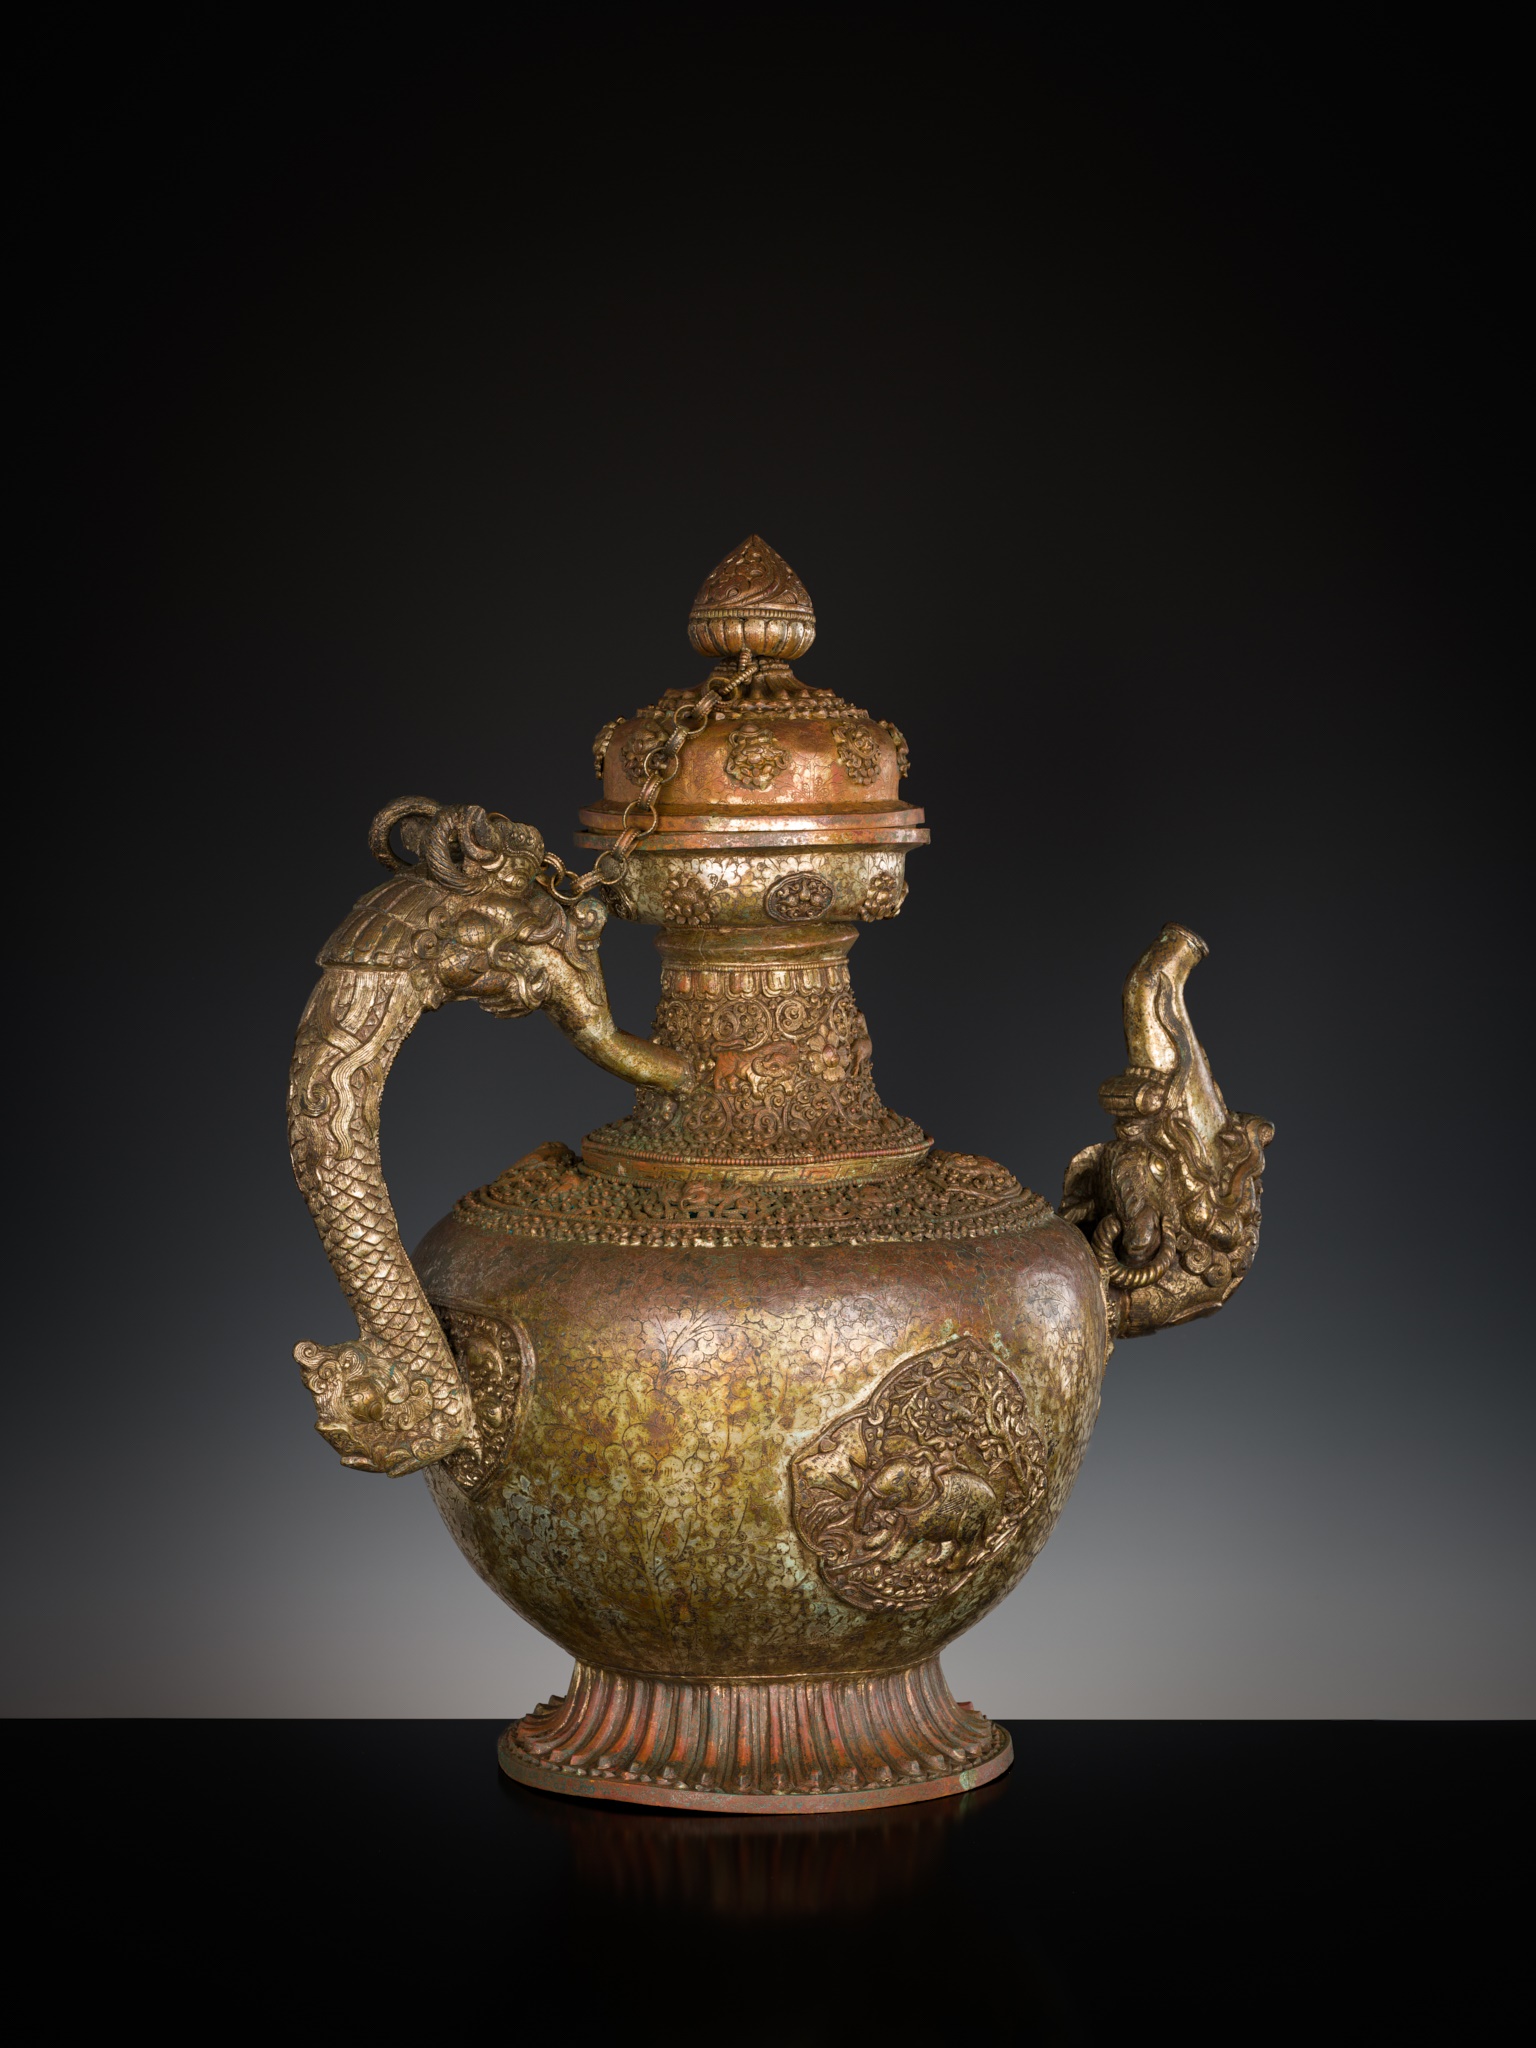 A MASSIVE SILVERED-COPPER RITUAL TEAPOT AND COVER, TIBET, 19TH CENTURY - Image 12 of 15